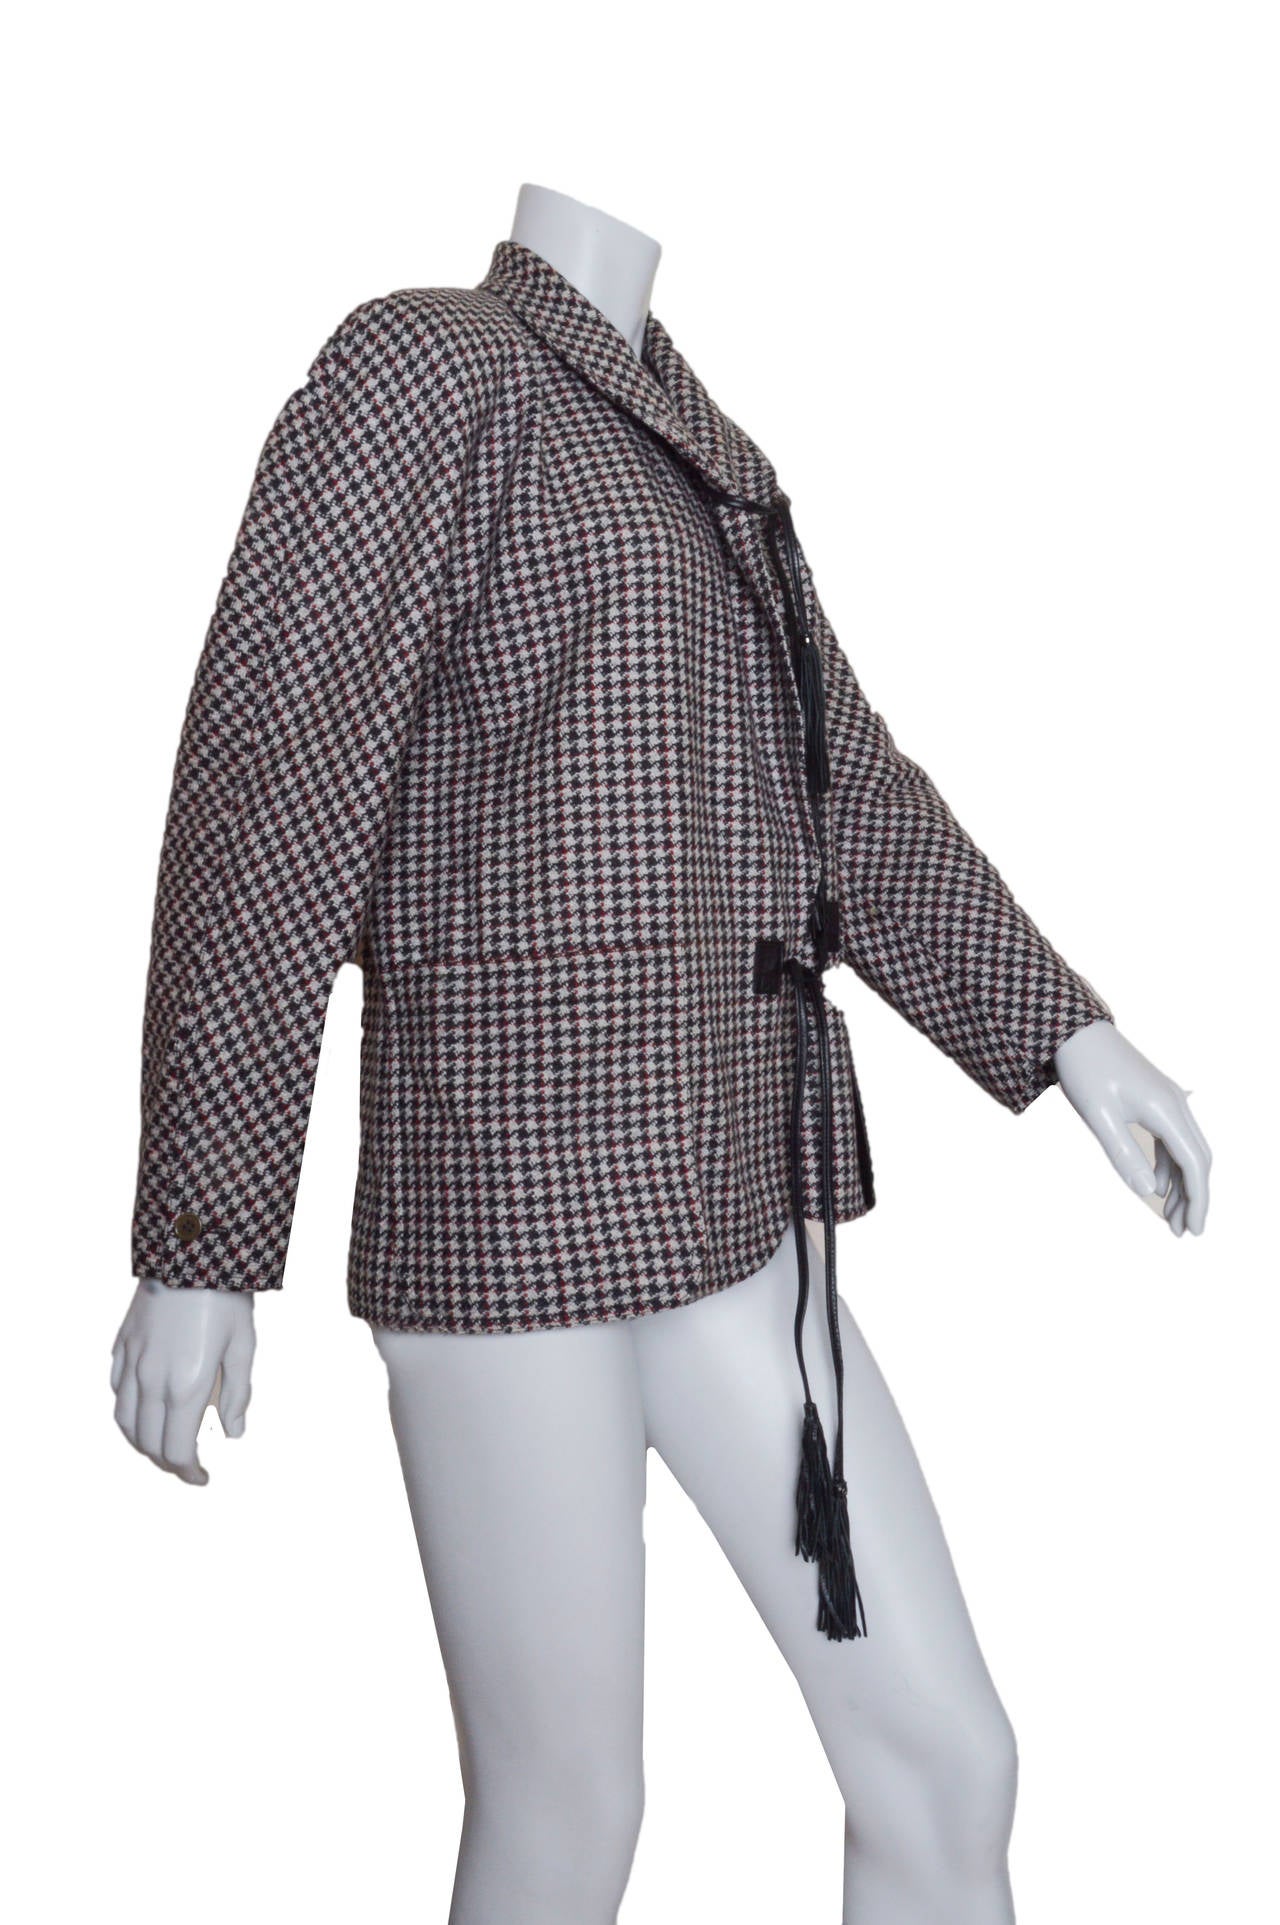 Vintage Gucci tweed jacket.
Back, grey, red and off white.
Boxy shape with black leather cord closures with tassels.
Slit chest pocket and two front patch pockets.
Lined.
Tagged a size 38.